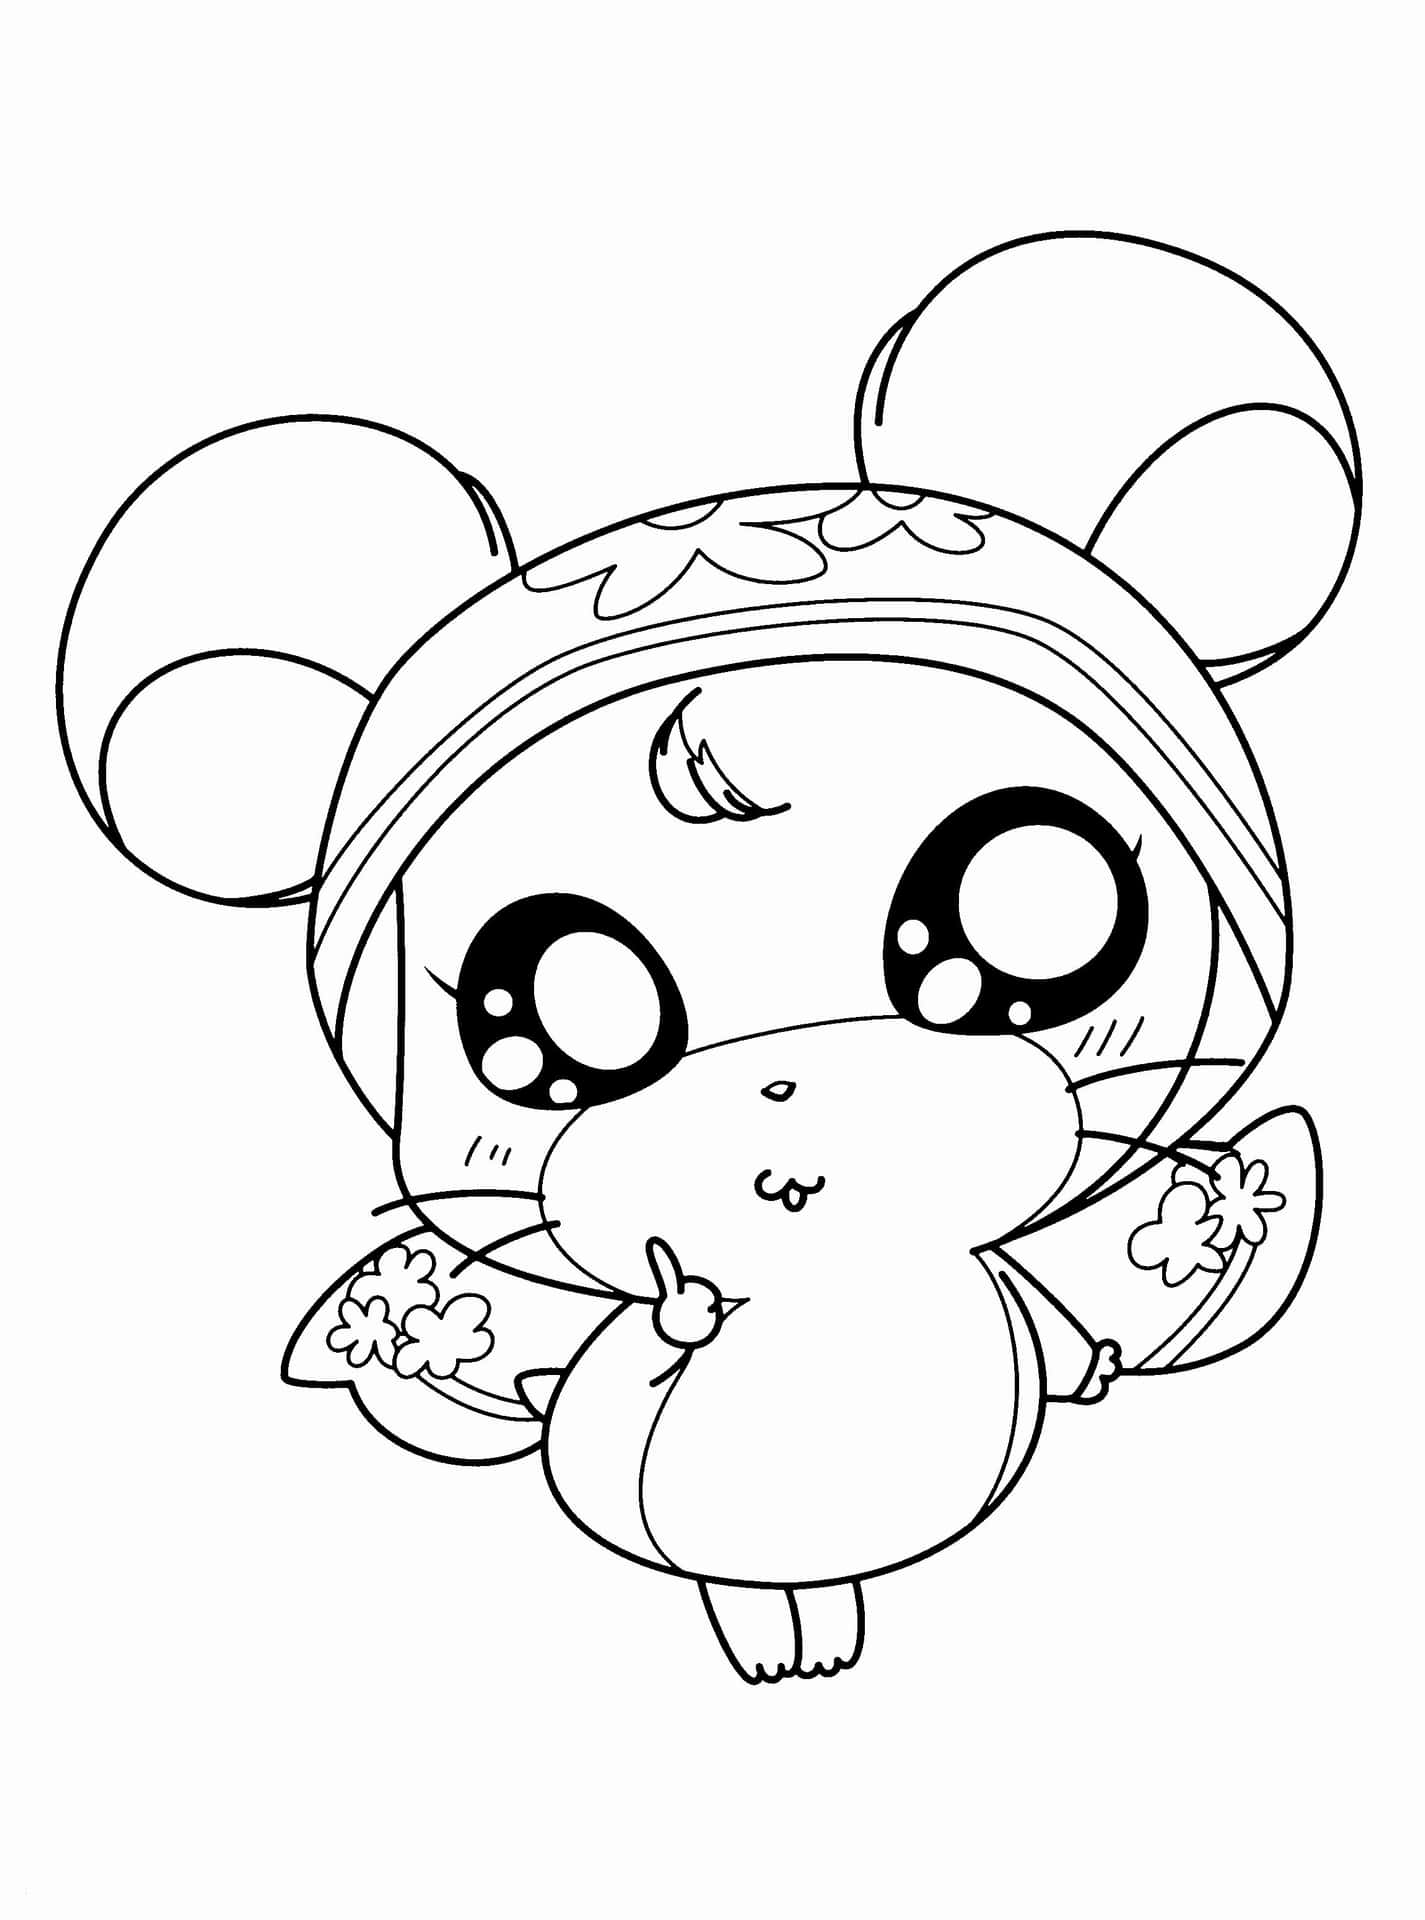 A Cute Little Mouse Coloring Page